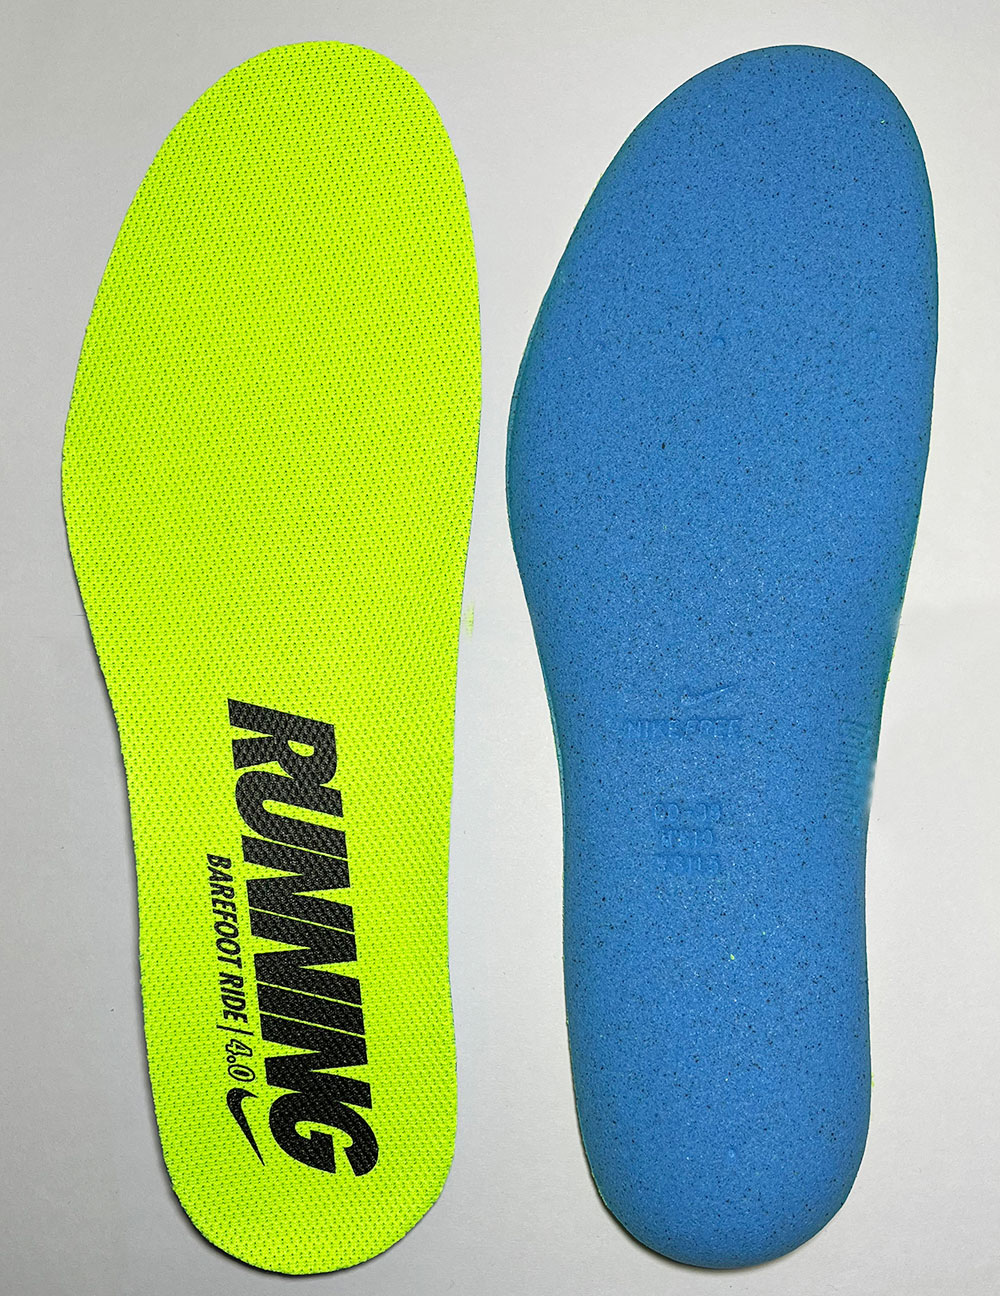 Replacement Nike Free RN Train Metcon Running Thin Shoe Insoles GK-12105 - Click Image to Close